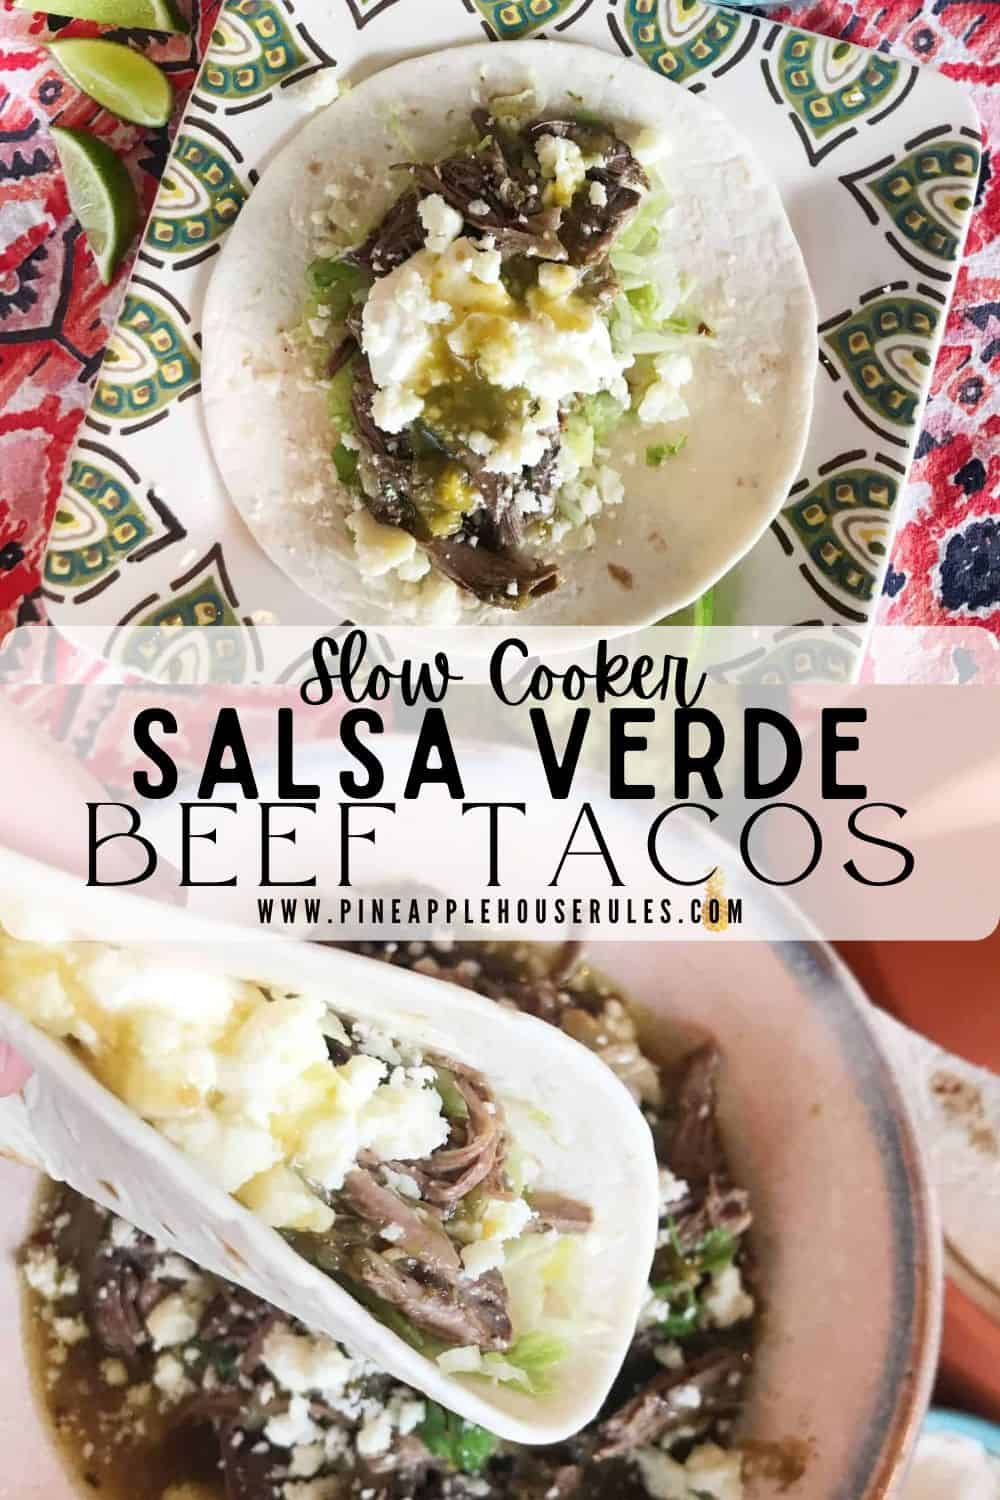 Slow Cooker Salsa Verde Beef Tacos are an easy crockpot recipe that is a huge hit with crowds! Garnish with your favorite toppings to make a delicious meal. Slow Cooker Salsa Verde Beef Tacos | Slow Cooker Recipes | Slow Cooker Meals | Slow Cooker Beef | Slow Cooker Beef Recipes | Slow Cooker Tacos | Slow Cooker Taco Meat | Slow Cooker Tacos Beef | Crockpot Recipes | Crockpot Meals | Crock Pot Cooking | Recipes for Dinner | Easy Dinner Recipes | Easy Meals | Beef Tacos | Beef Taco Recipes